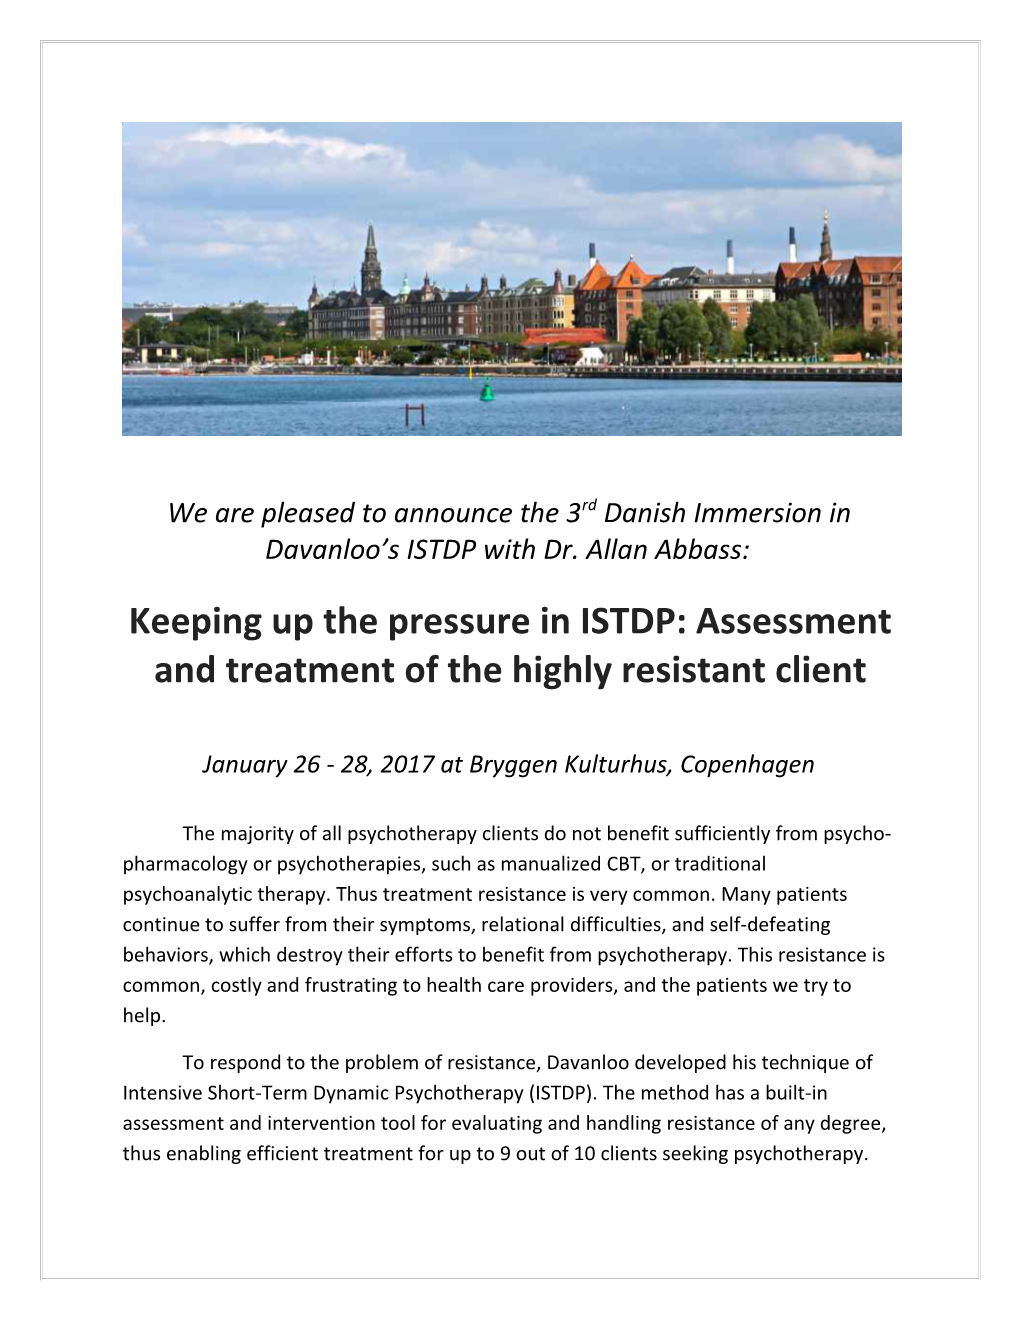 Keeping up the Pressure in ISTDP: Assessment and Treatment of the Highly Resistant Client